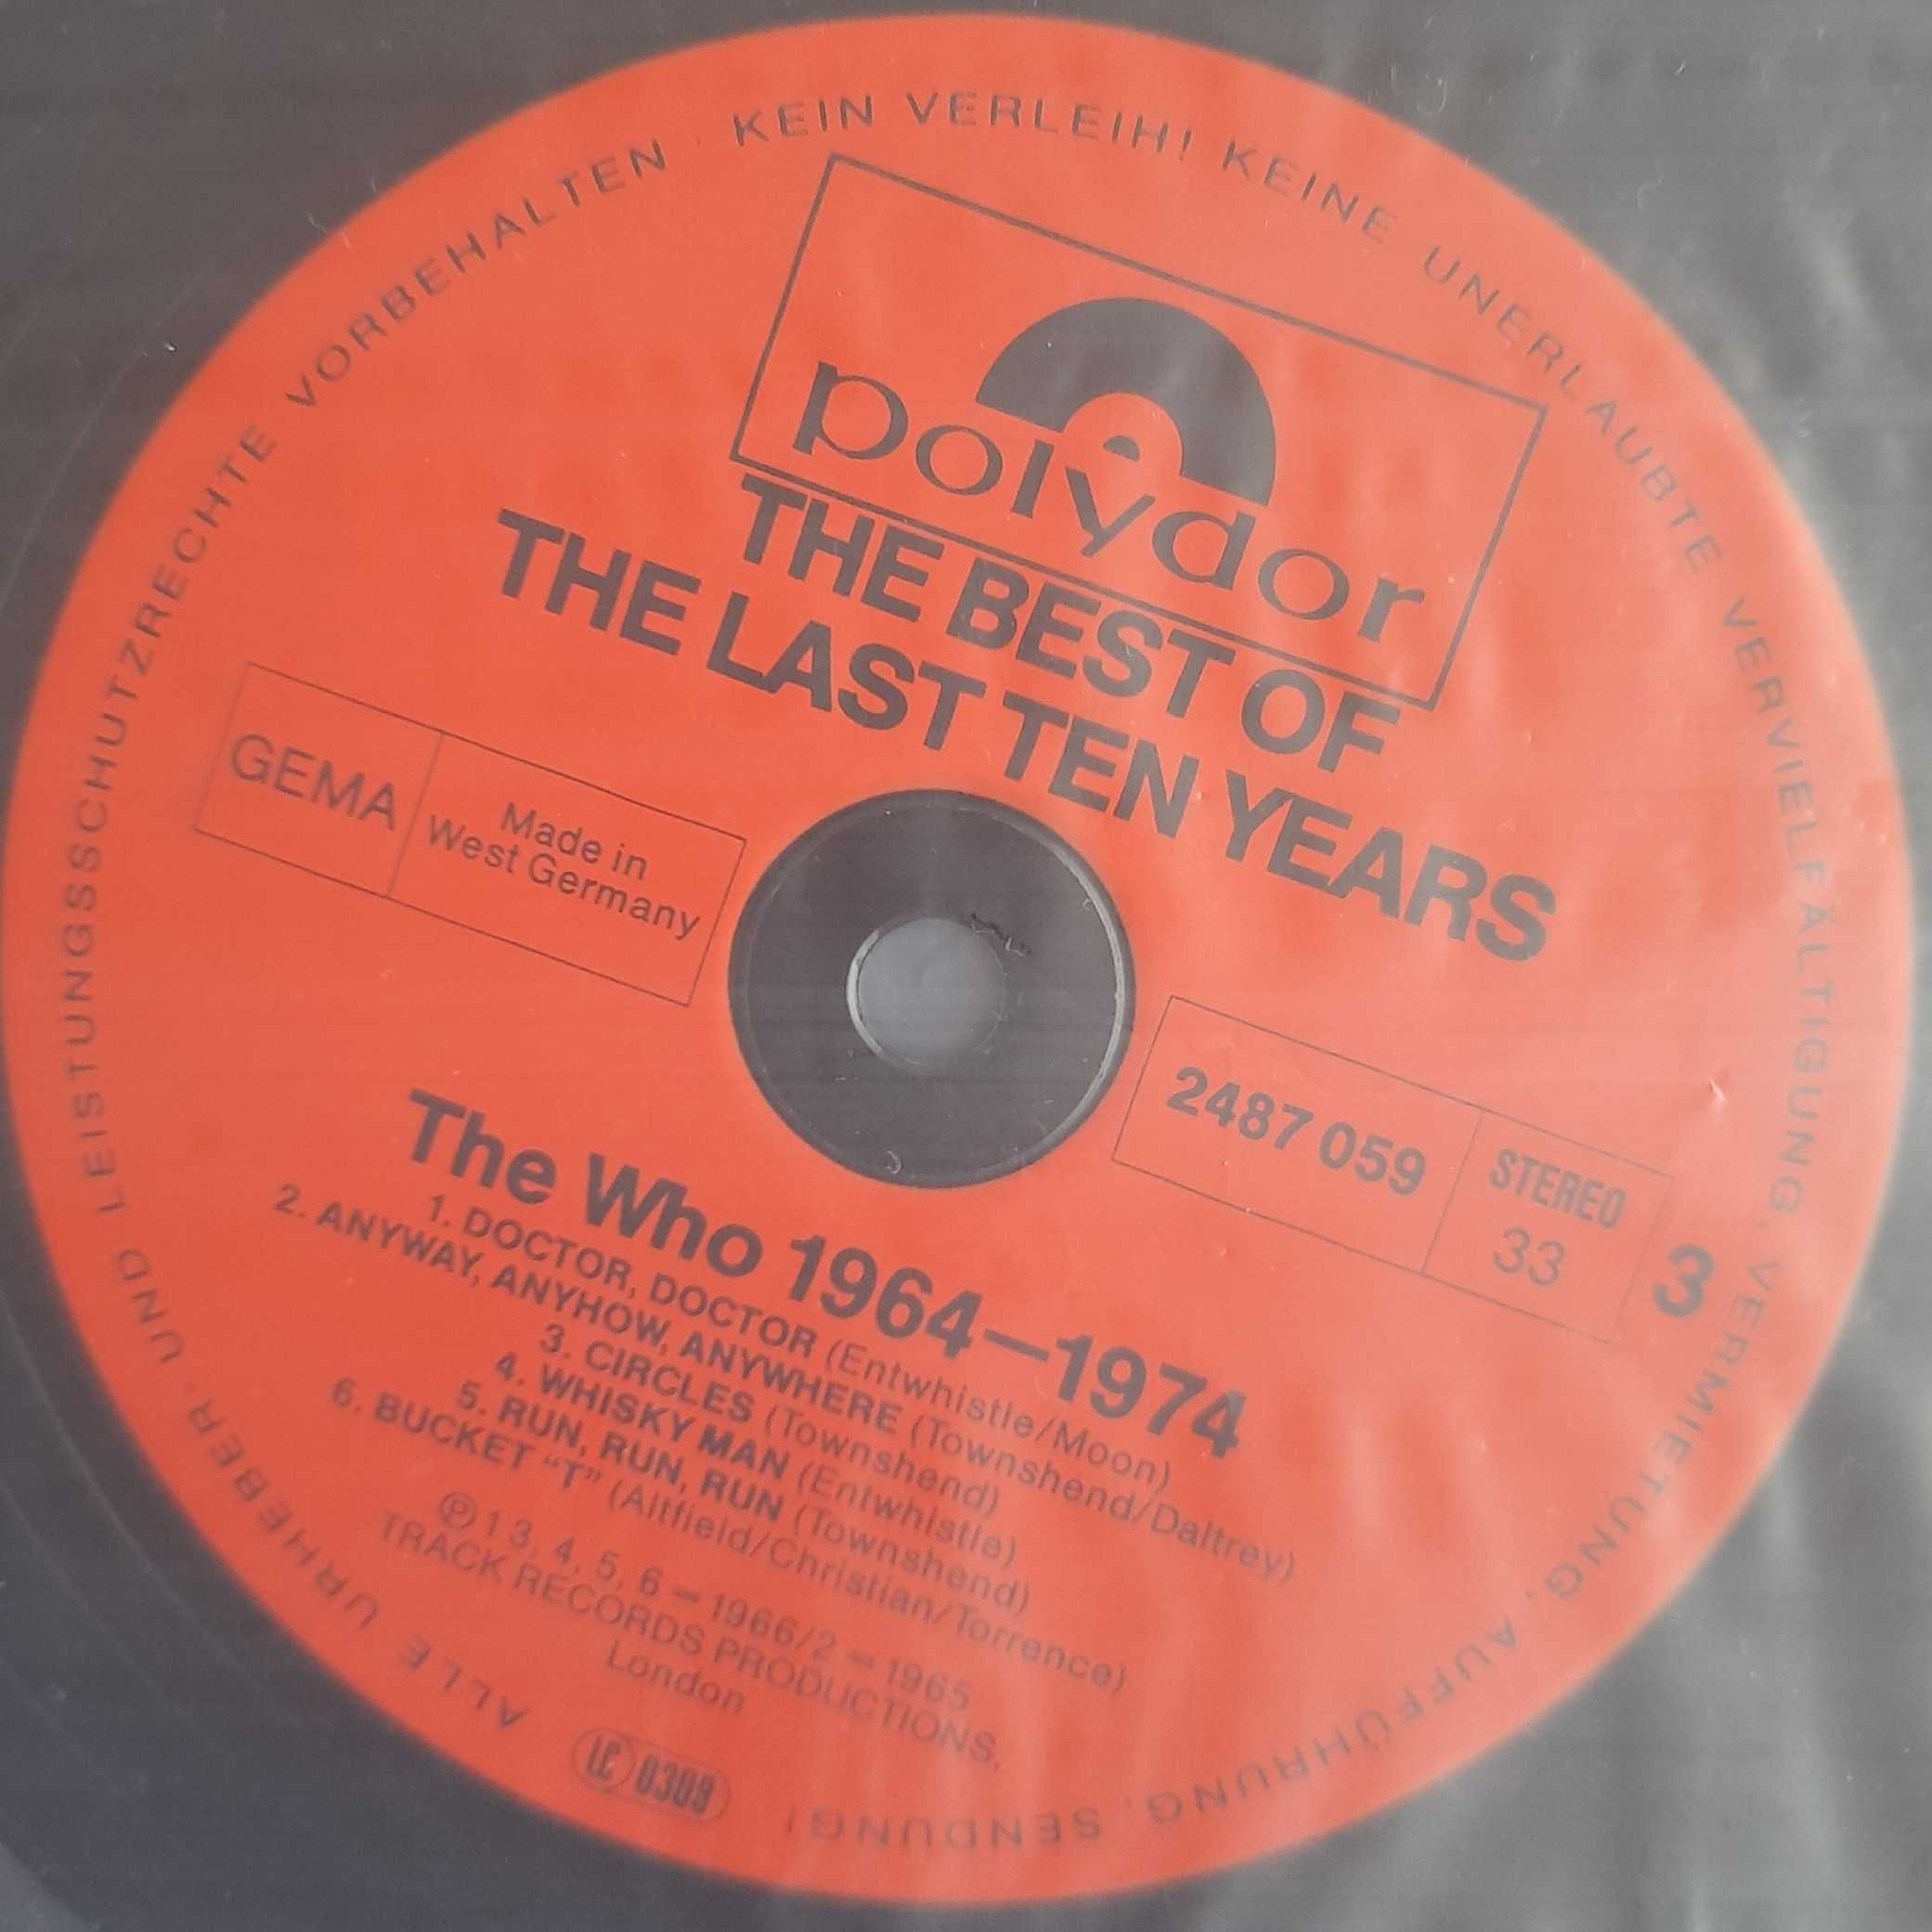 The Who – 64 - 74 / The Best Of The Last Ten Years, VG+/VG+ (без Ex)